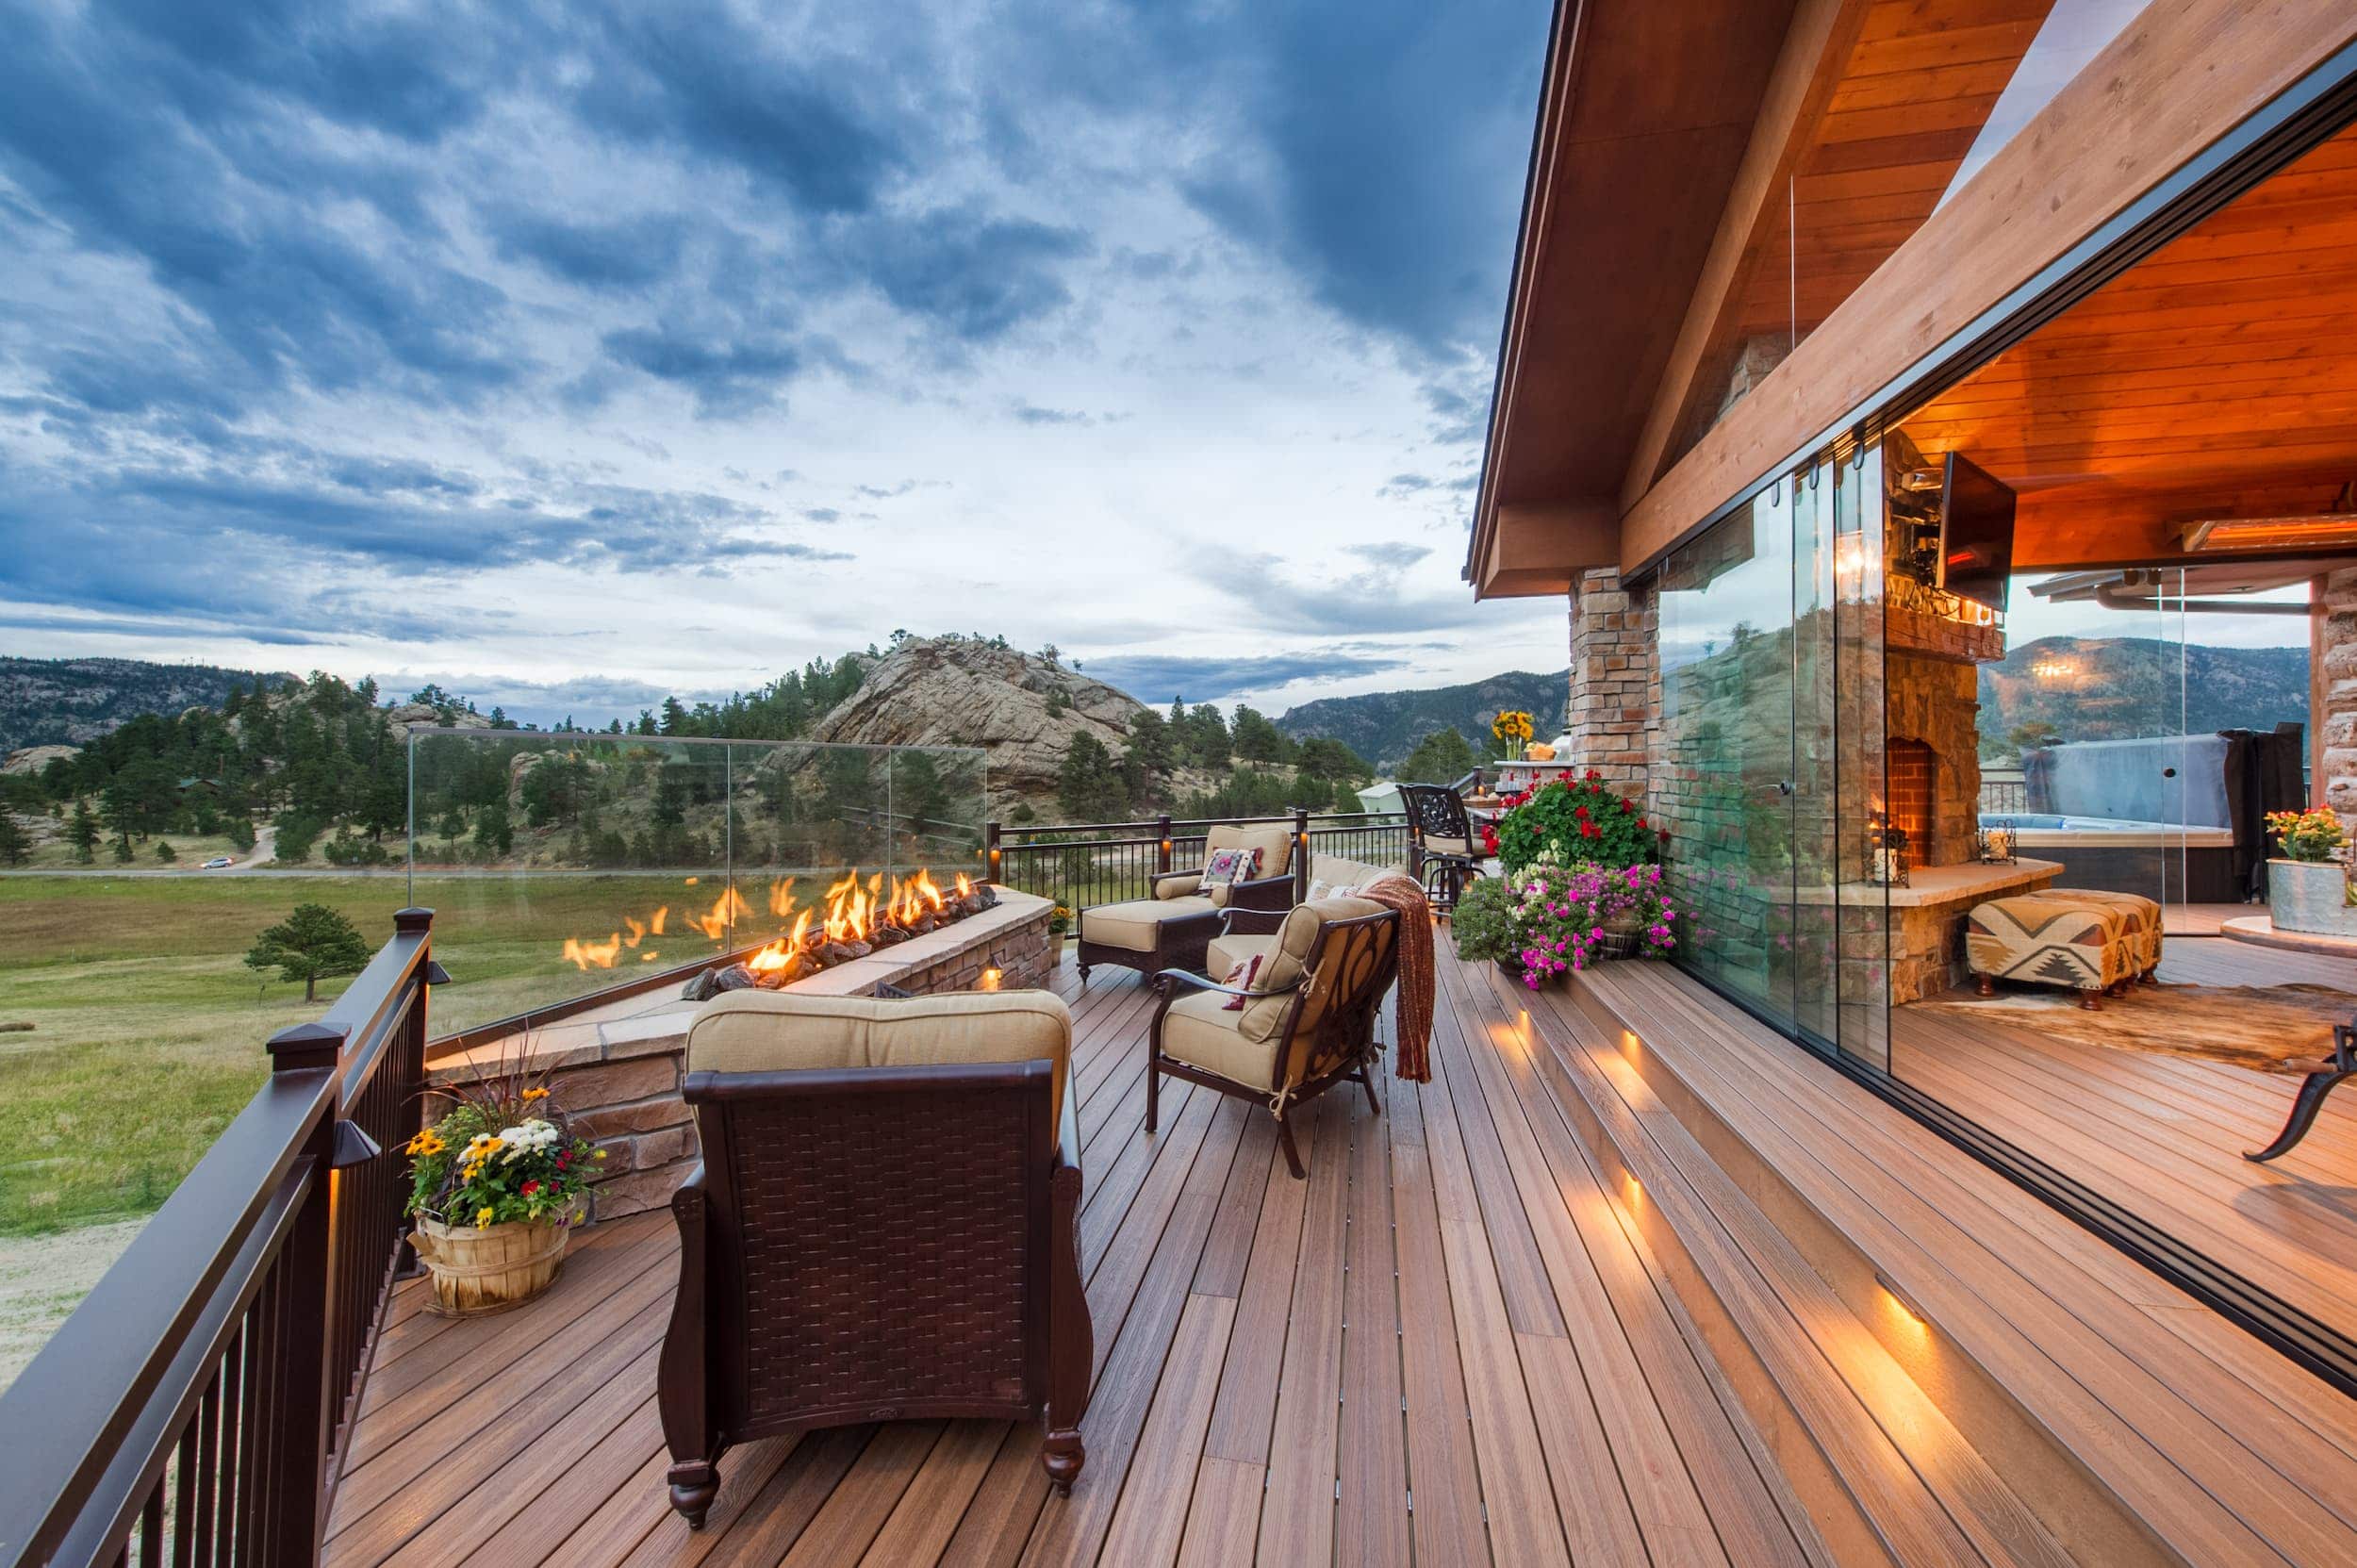 A deck with furniture and a view of the mountains.